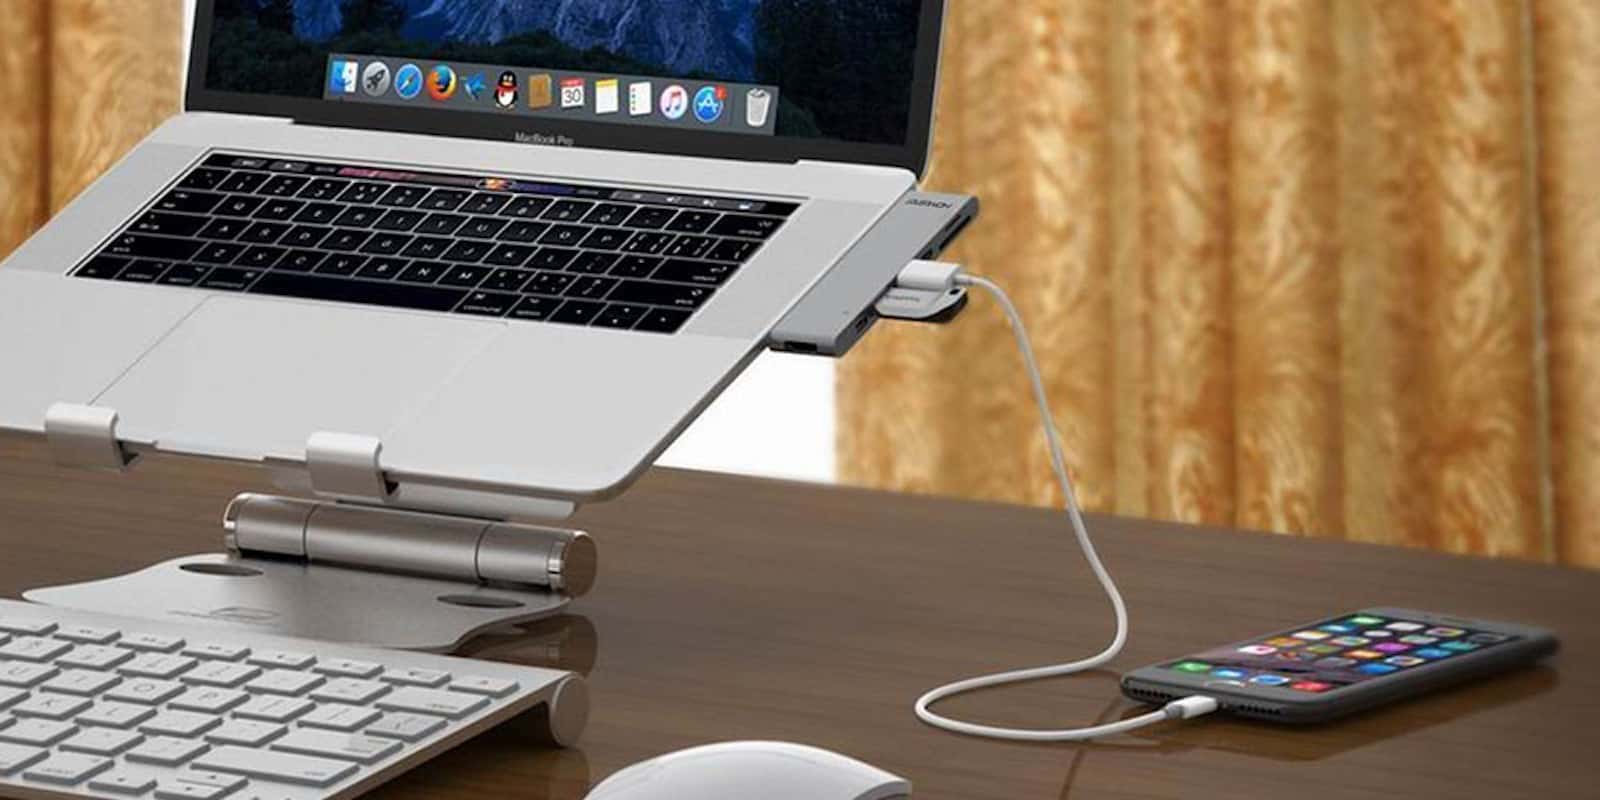 Instantly add a variety of useful connections to your new MacBook Pro.